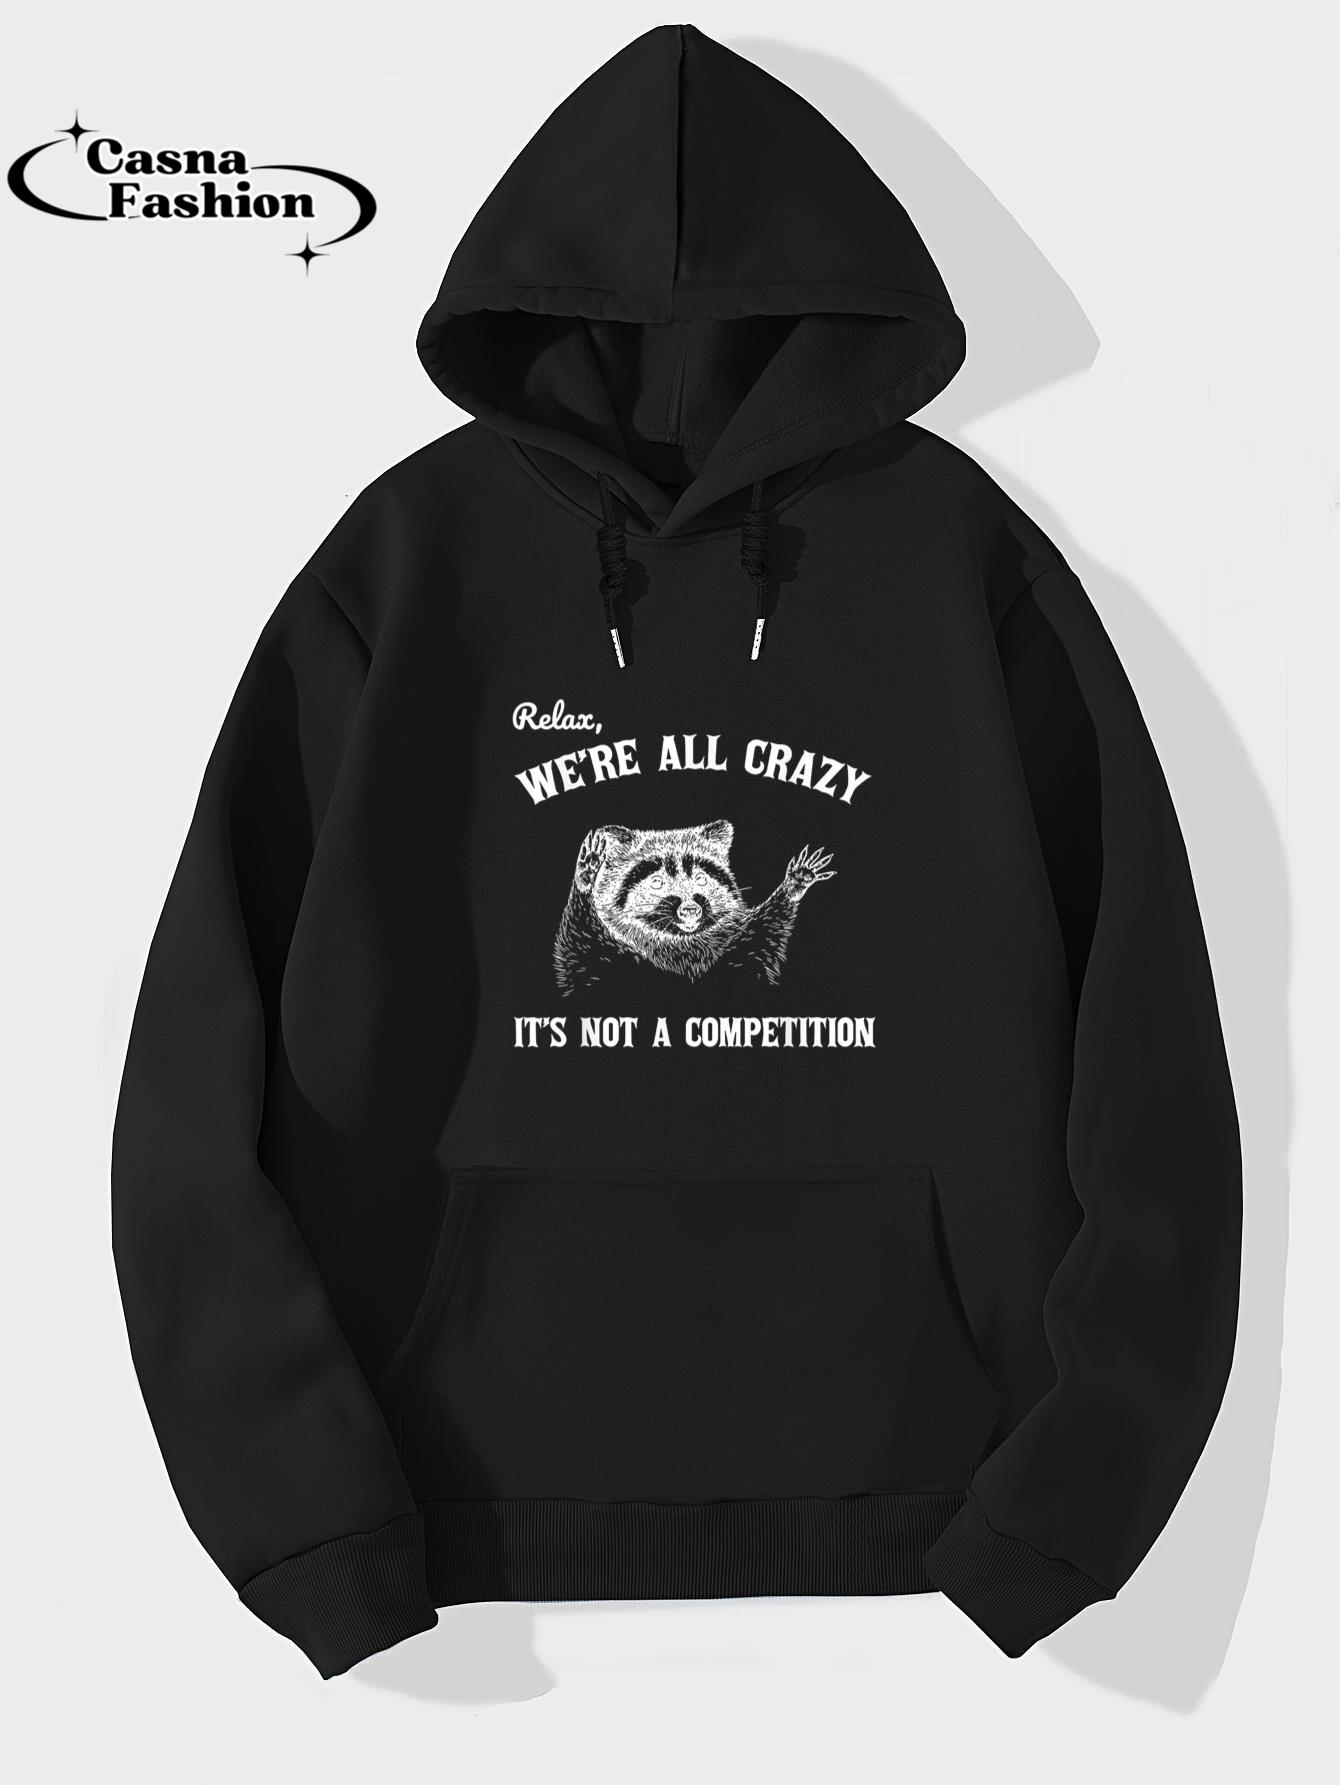 casnafashion_Hoodie_Relax We Are All Crazy It's Not A Competition Raccoon Meme T-Shirt_hoodie_black hoodie